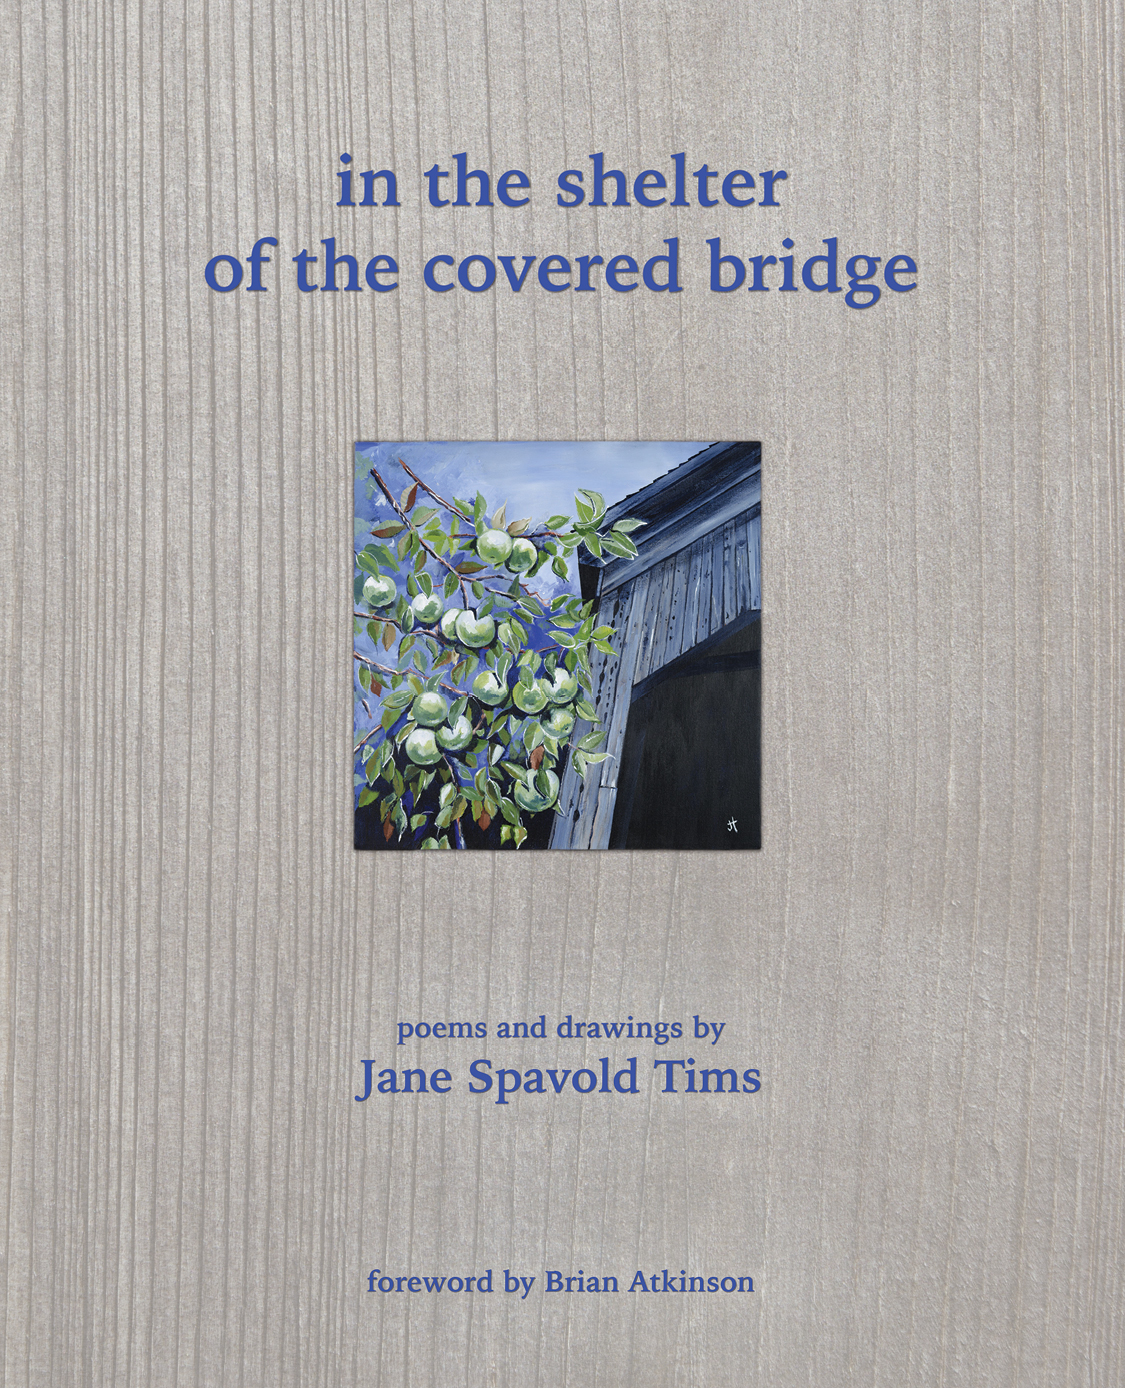 in the shelter of the covered bridge